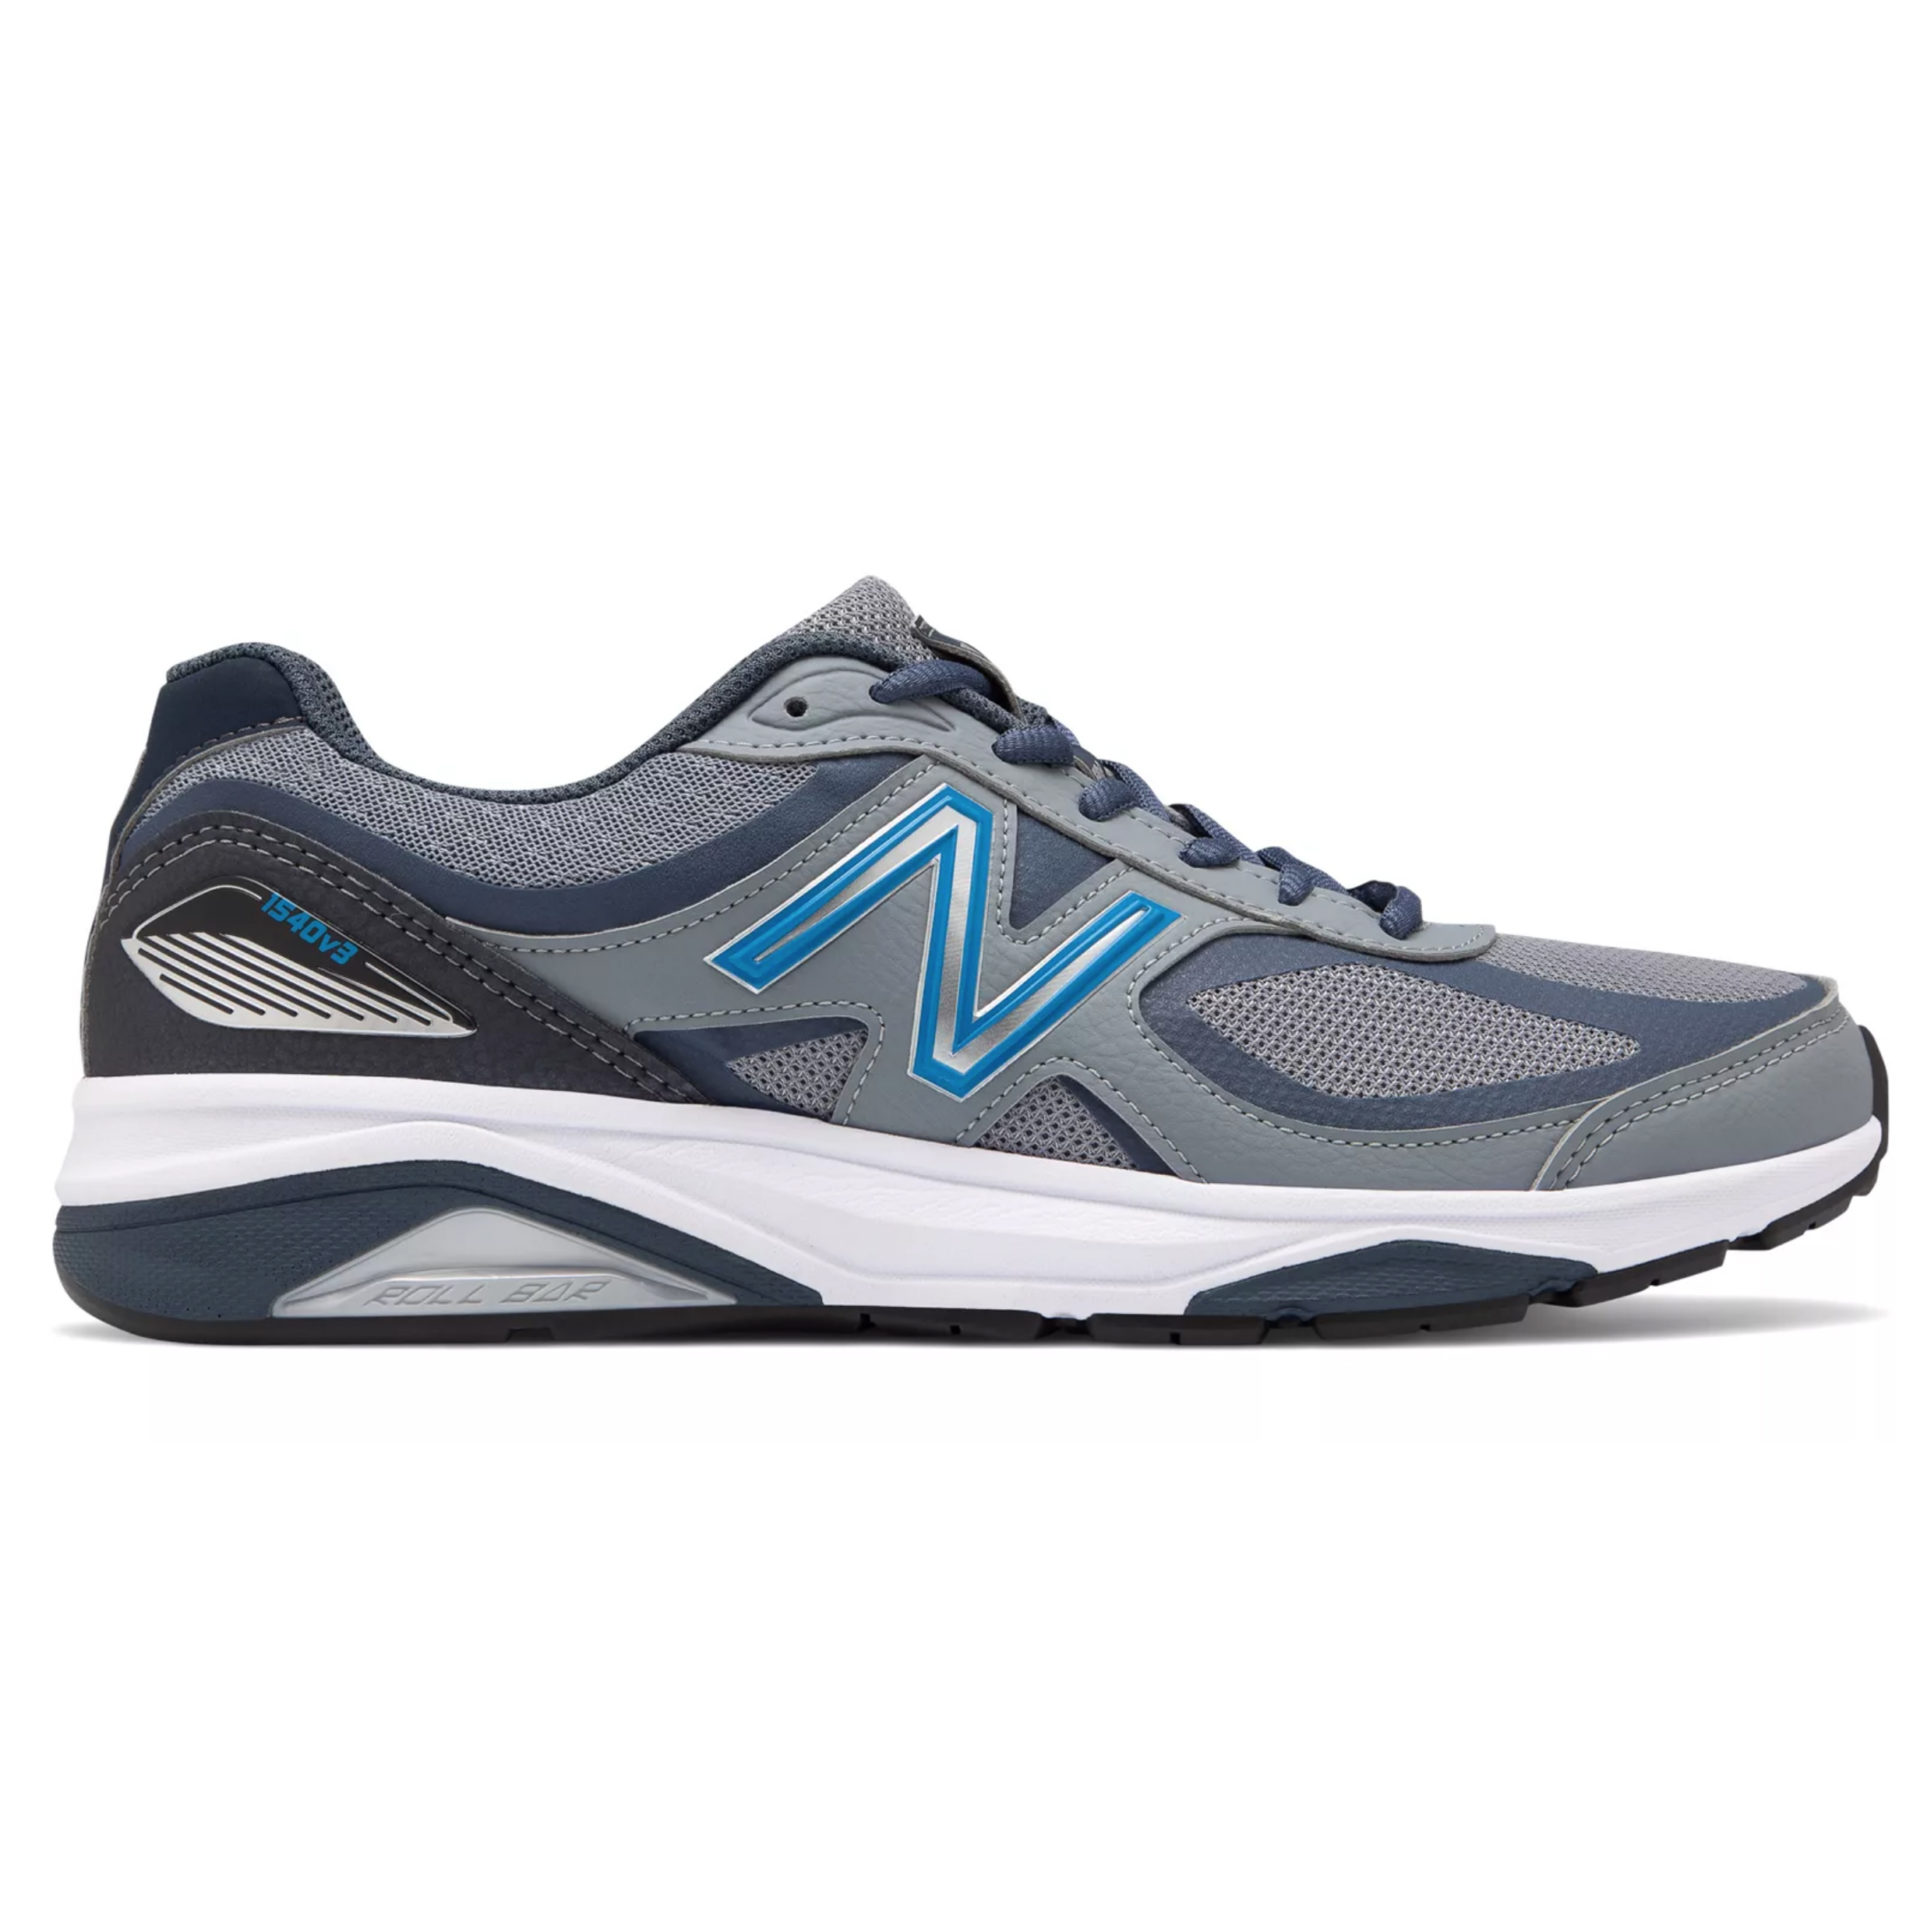 New Balance Men's 1540 v3 Marblehead with Black | Laurie's Shoes